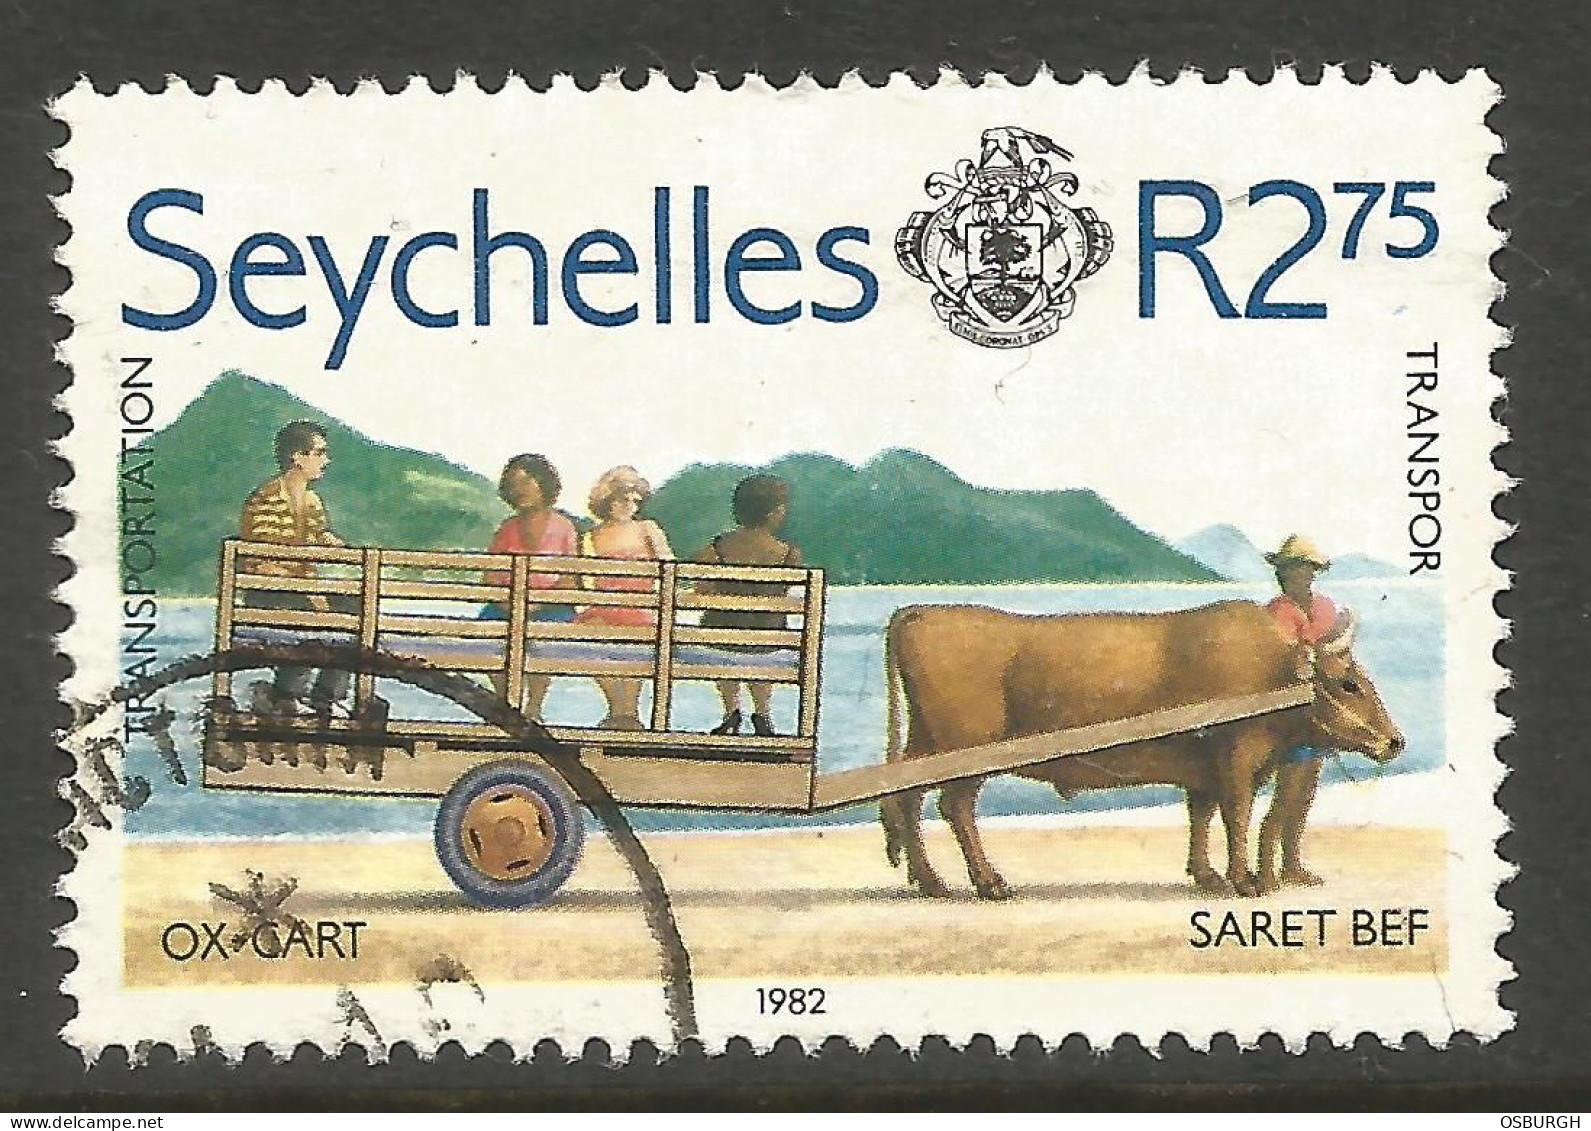 SEYCHELLES. 1982. R2.75 OXCART USED. - Seychelles (1976-...)